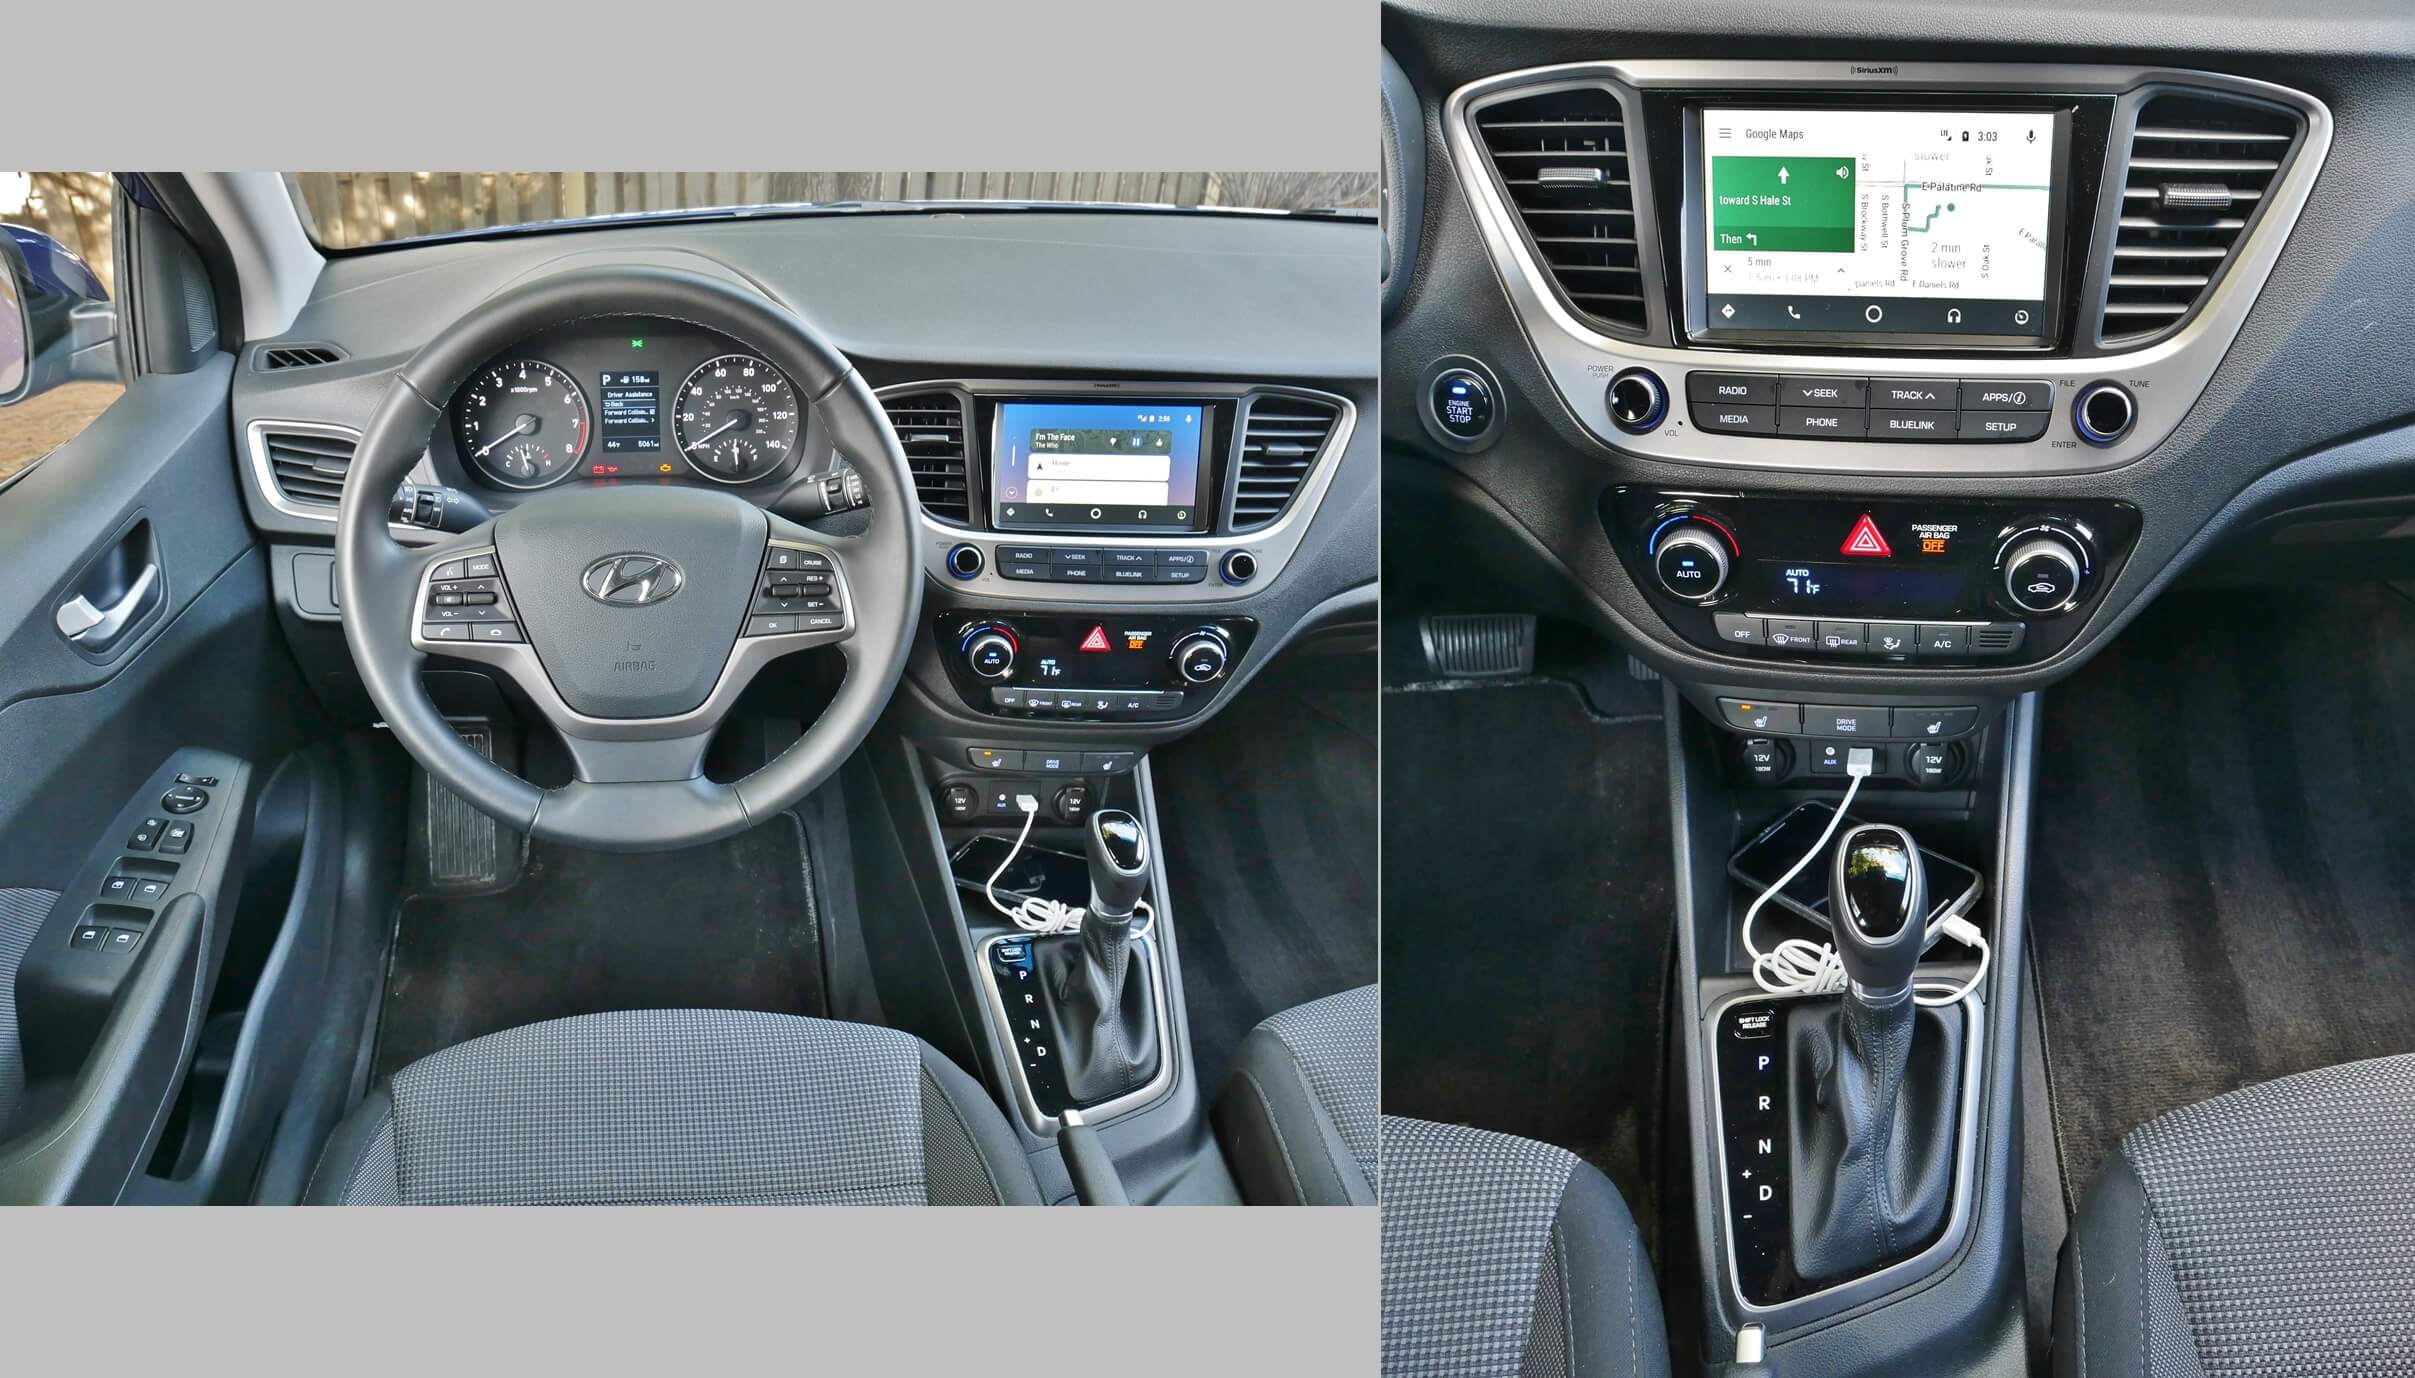 2018 Hyundai Accent Limited: Android Auto overlay (Apple Car Play also available) as displayed on the 7"-inch touch LCD display